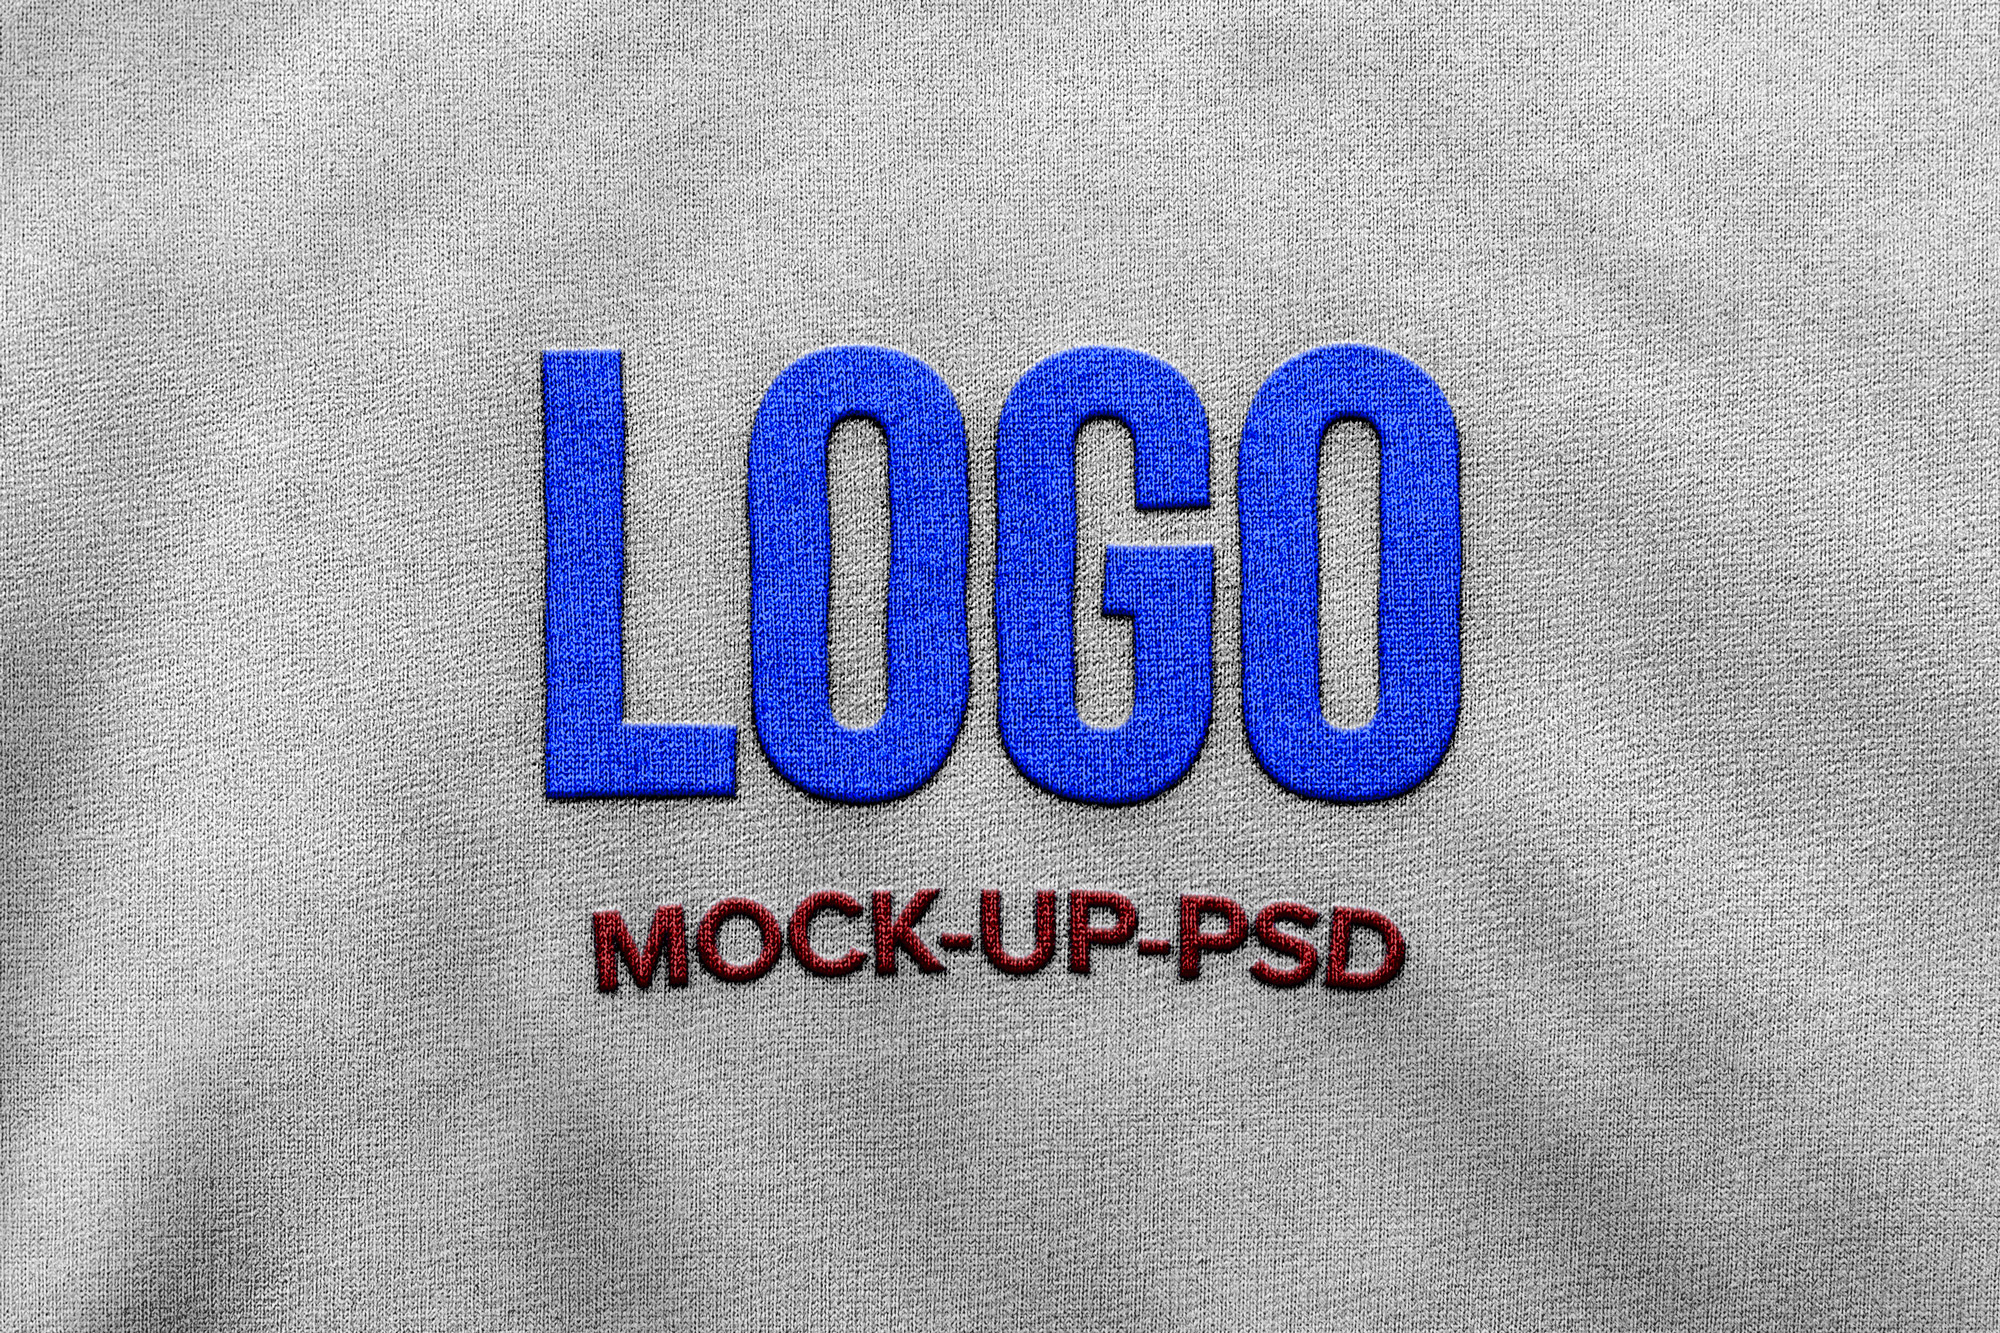 Top 99 embroidered logo mockup free download most downloaded - Wikipedia